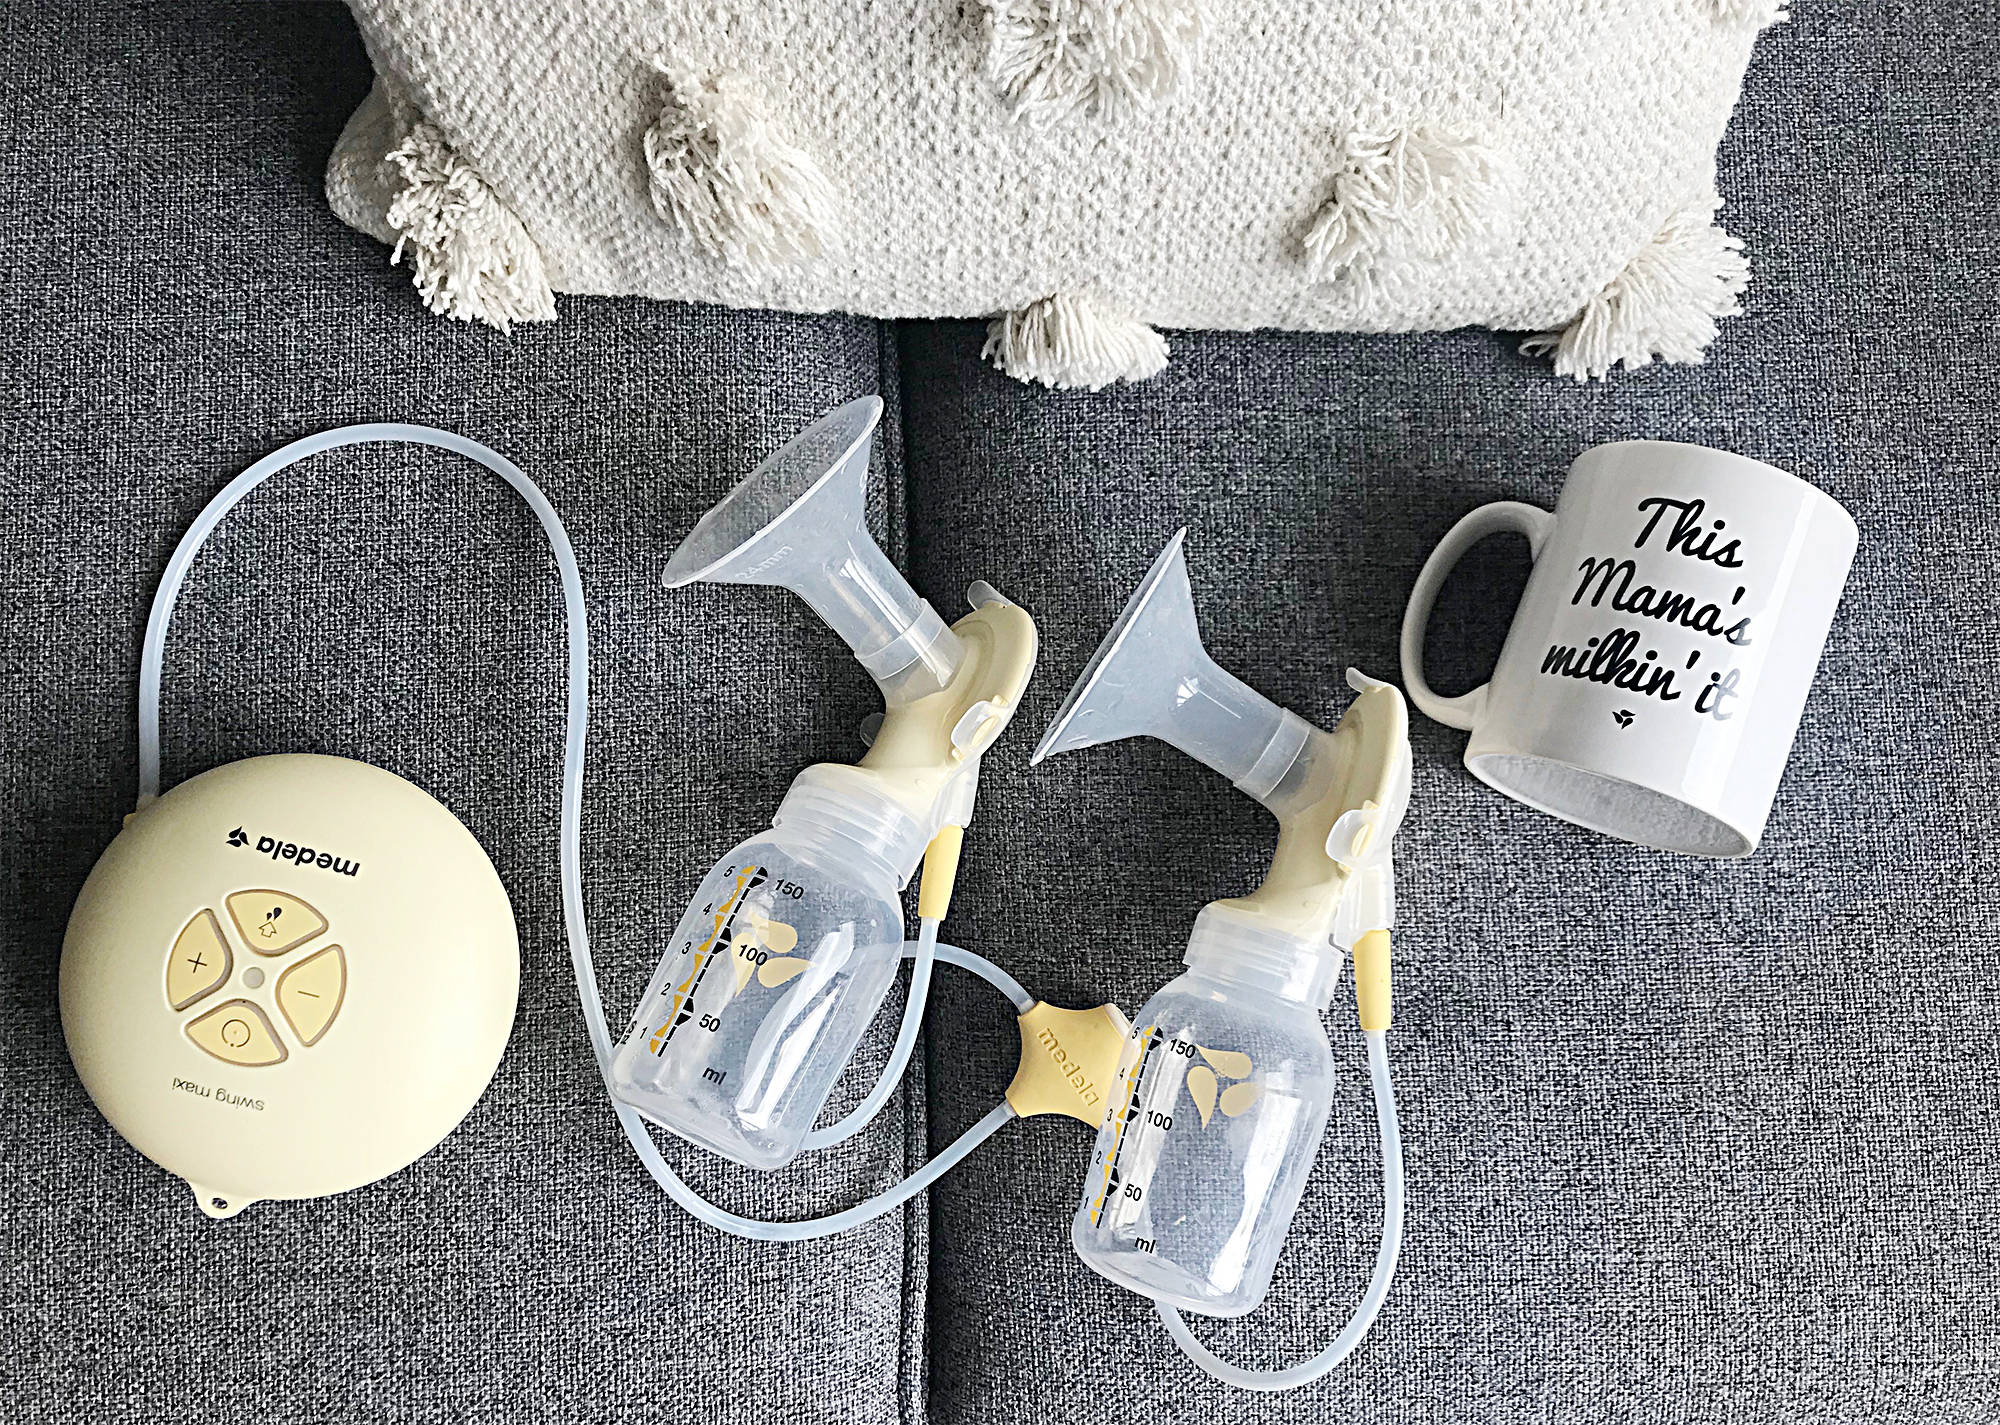 A Medela Swing maxi double electric breast pump lying on a grey sofa next to a cream coloured cushion and a mug with "This Mama's milkin' it" written on it